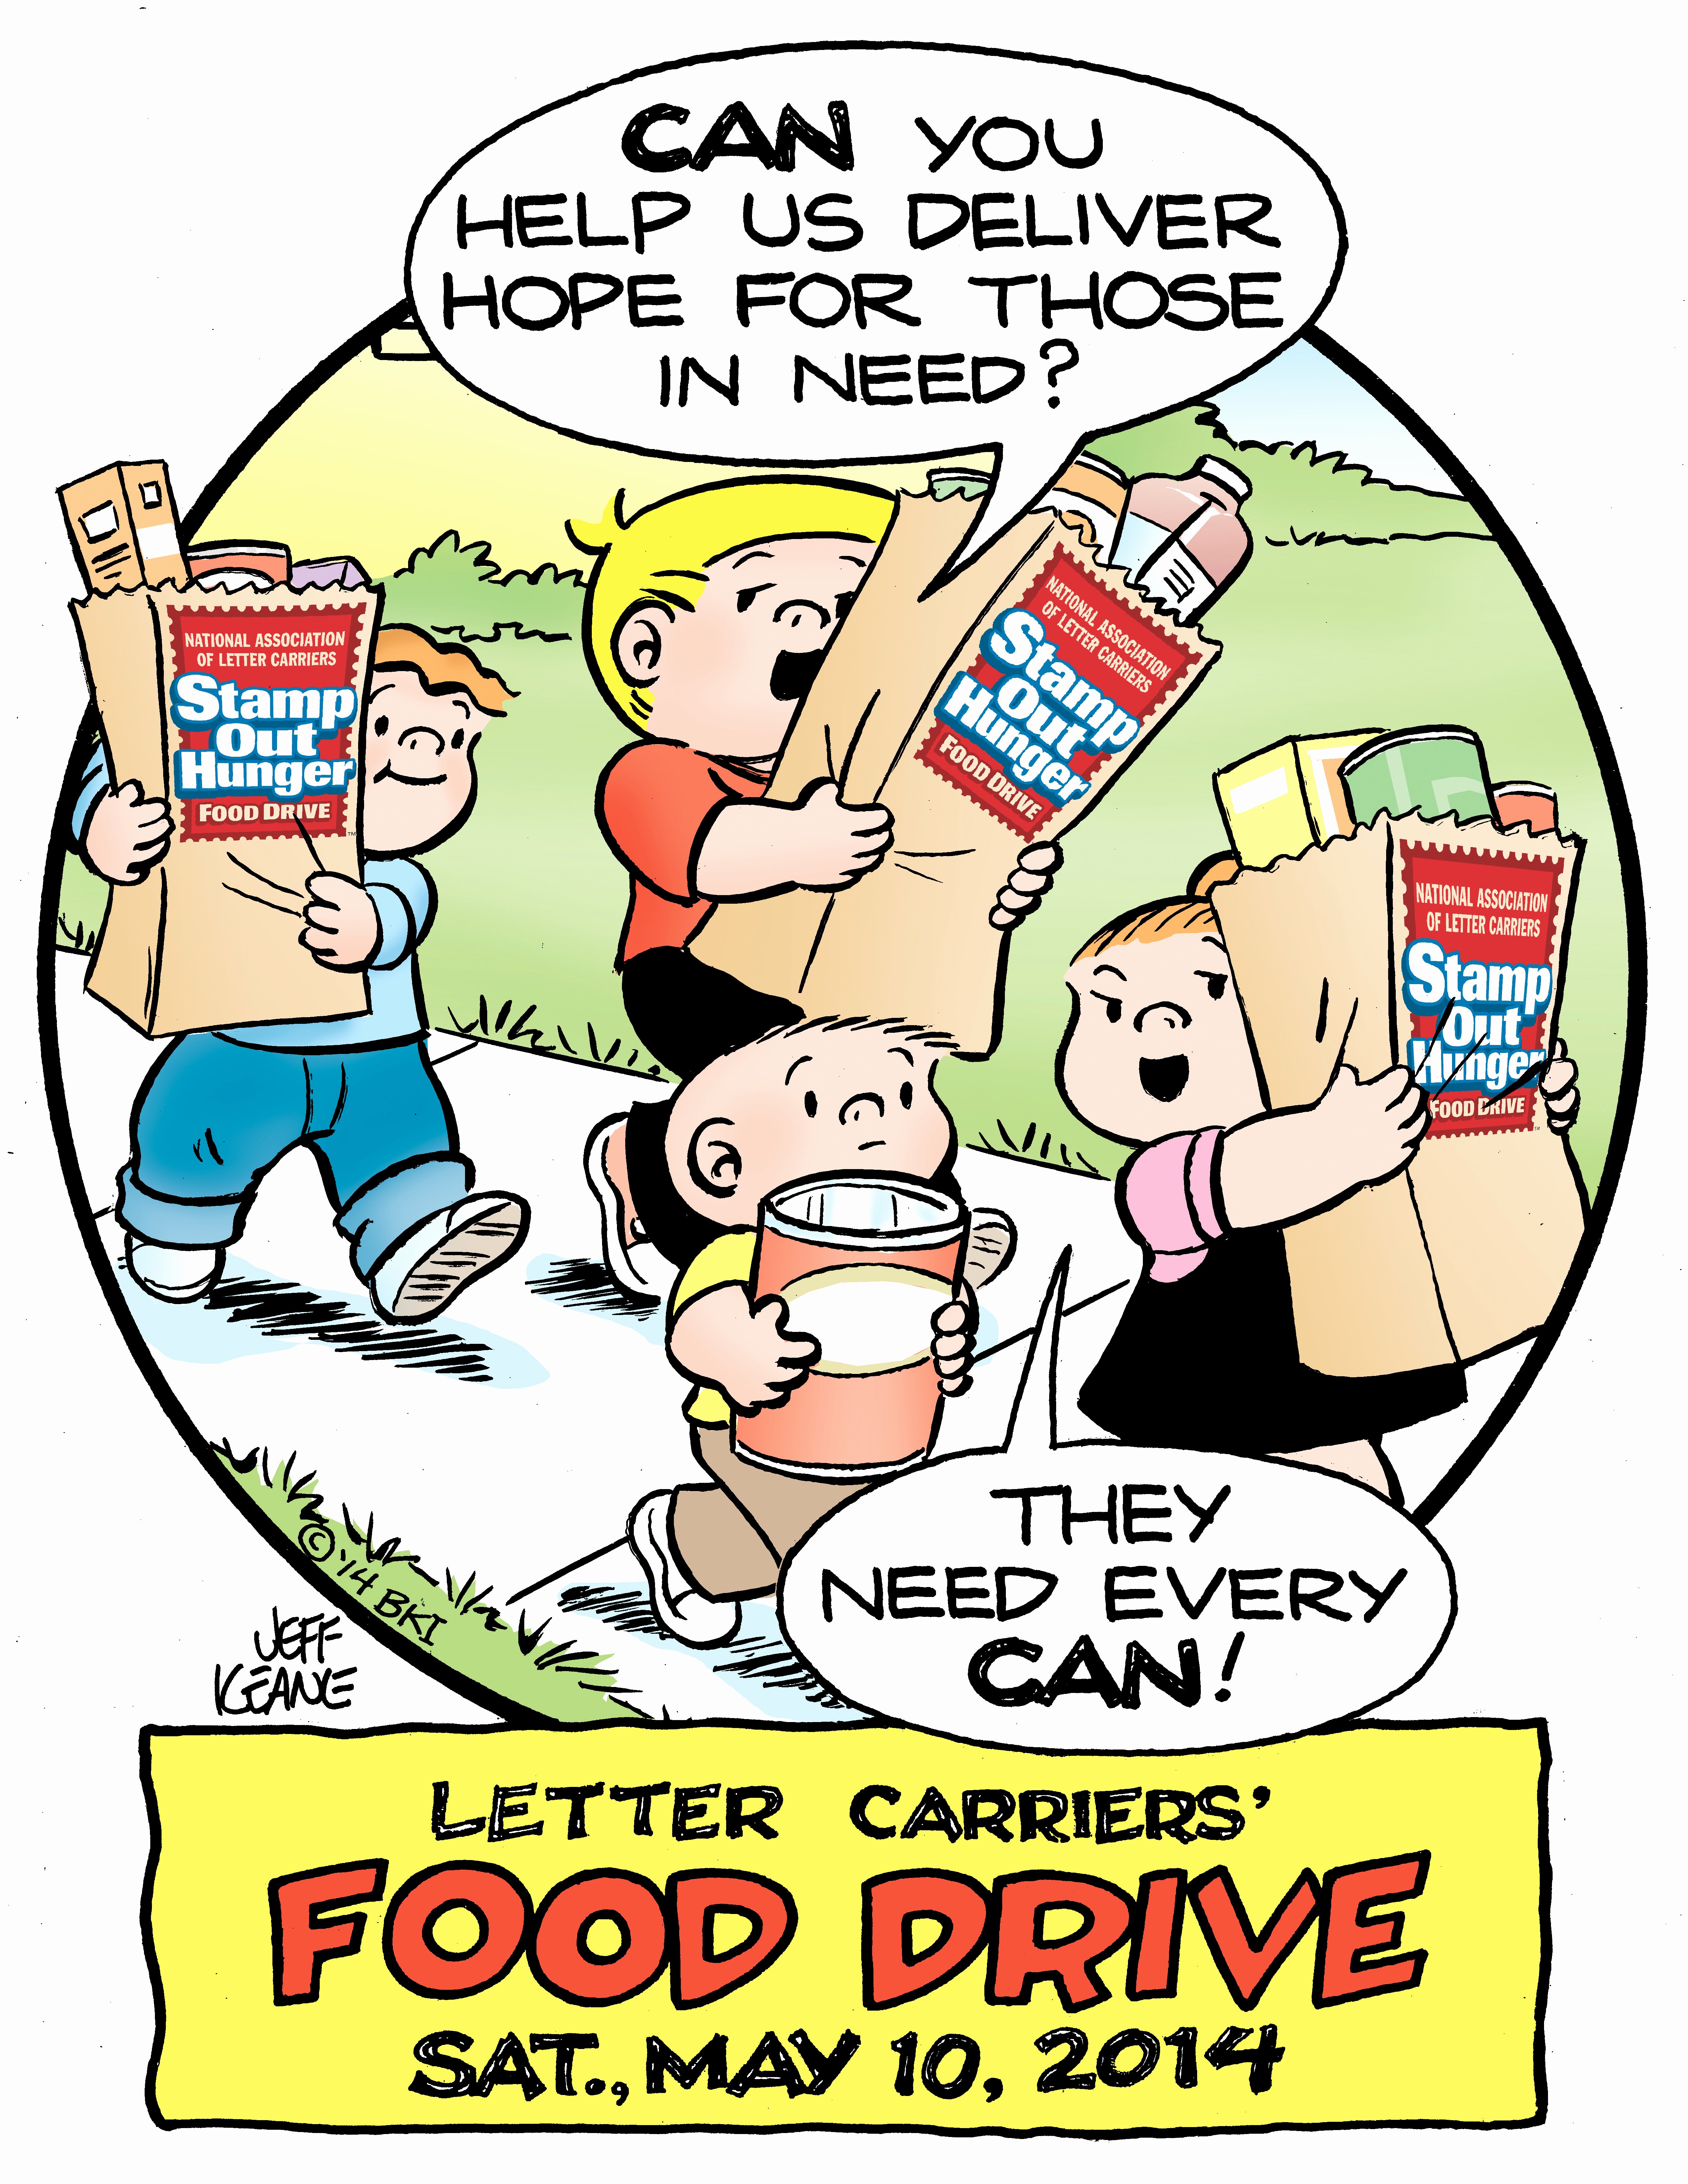 Canned Food Drive Flyer Fresh May 10 is the National Letter Carriers’ Food Drive and You Can Help United Way Of Cass Clay